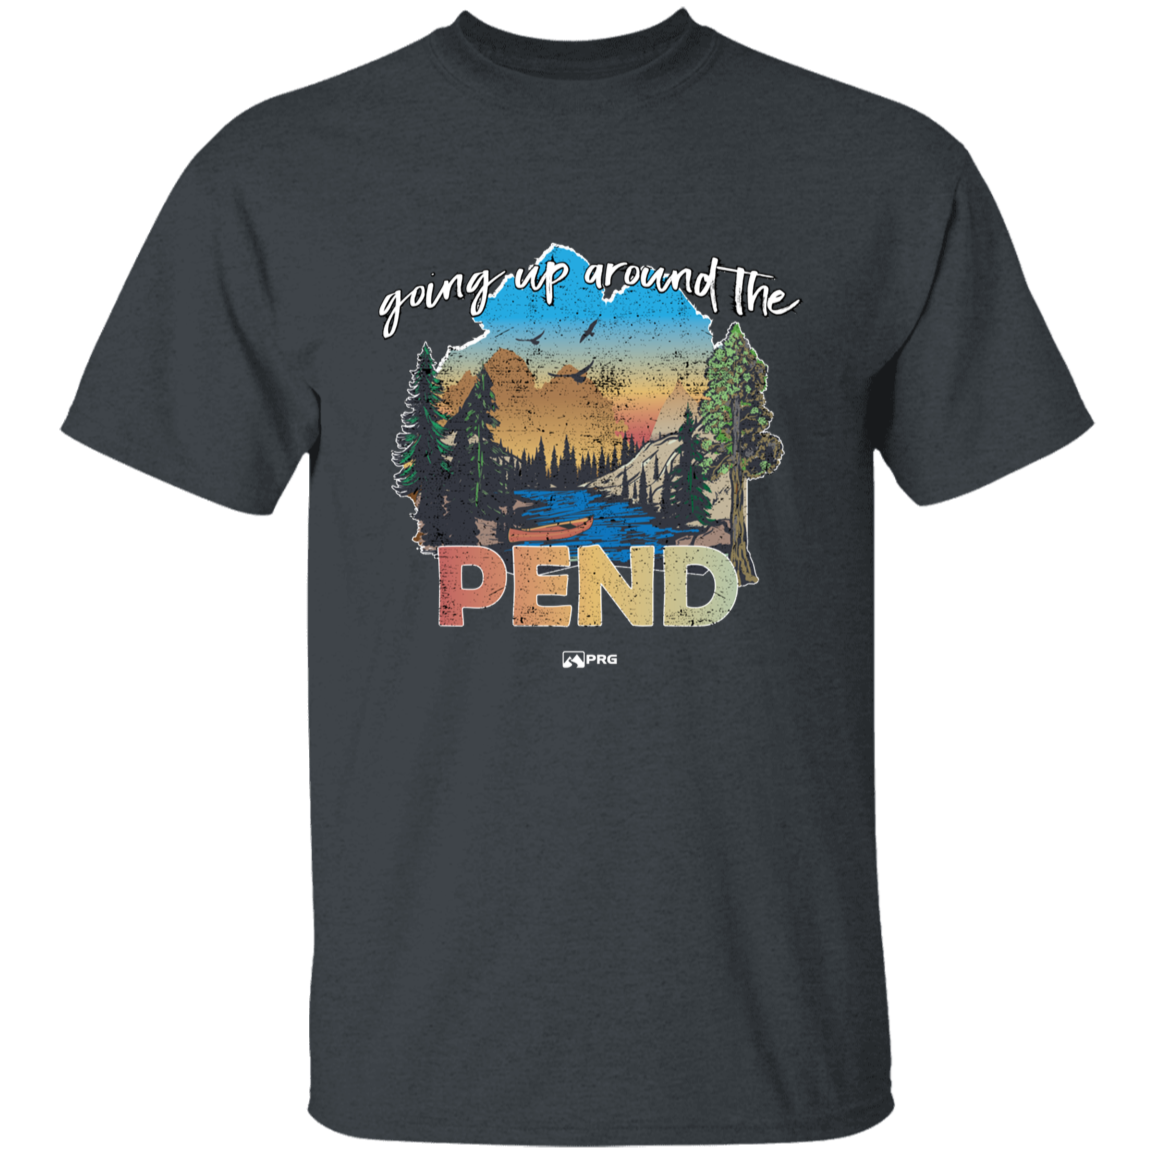 Around the Pend - Youth Shirt